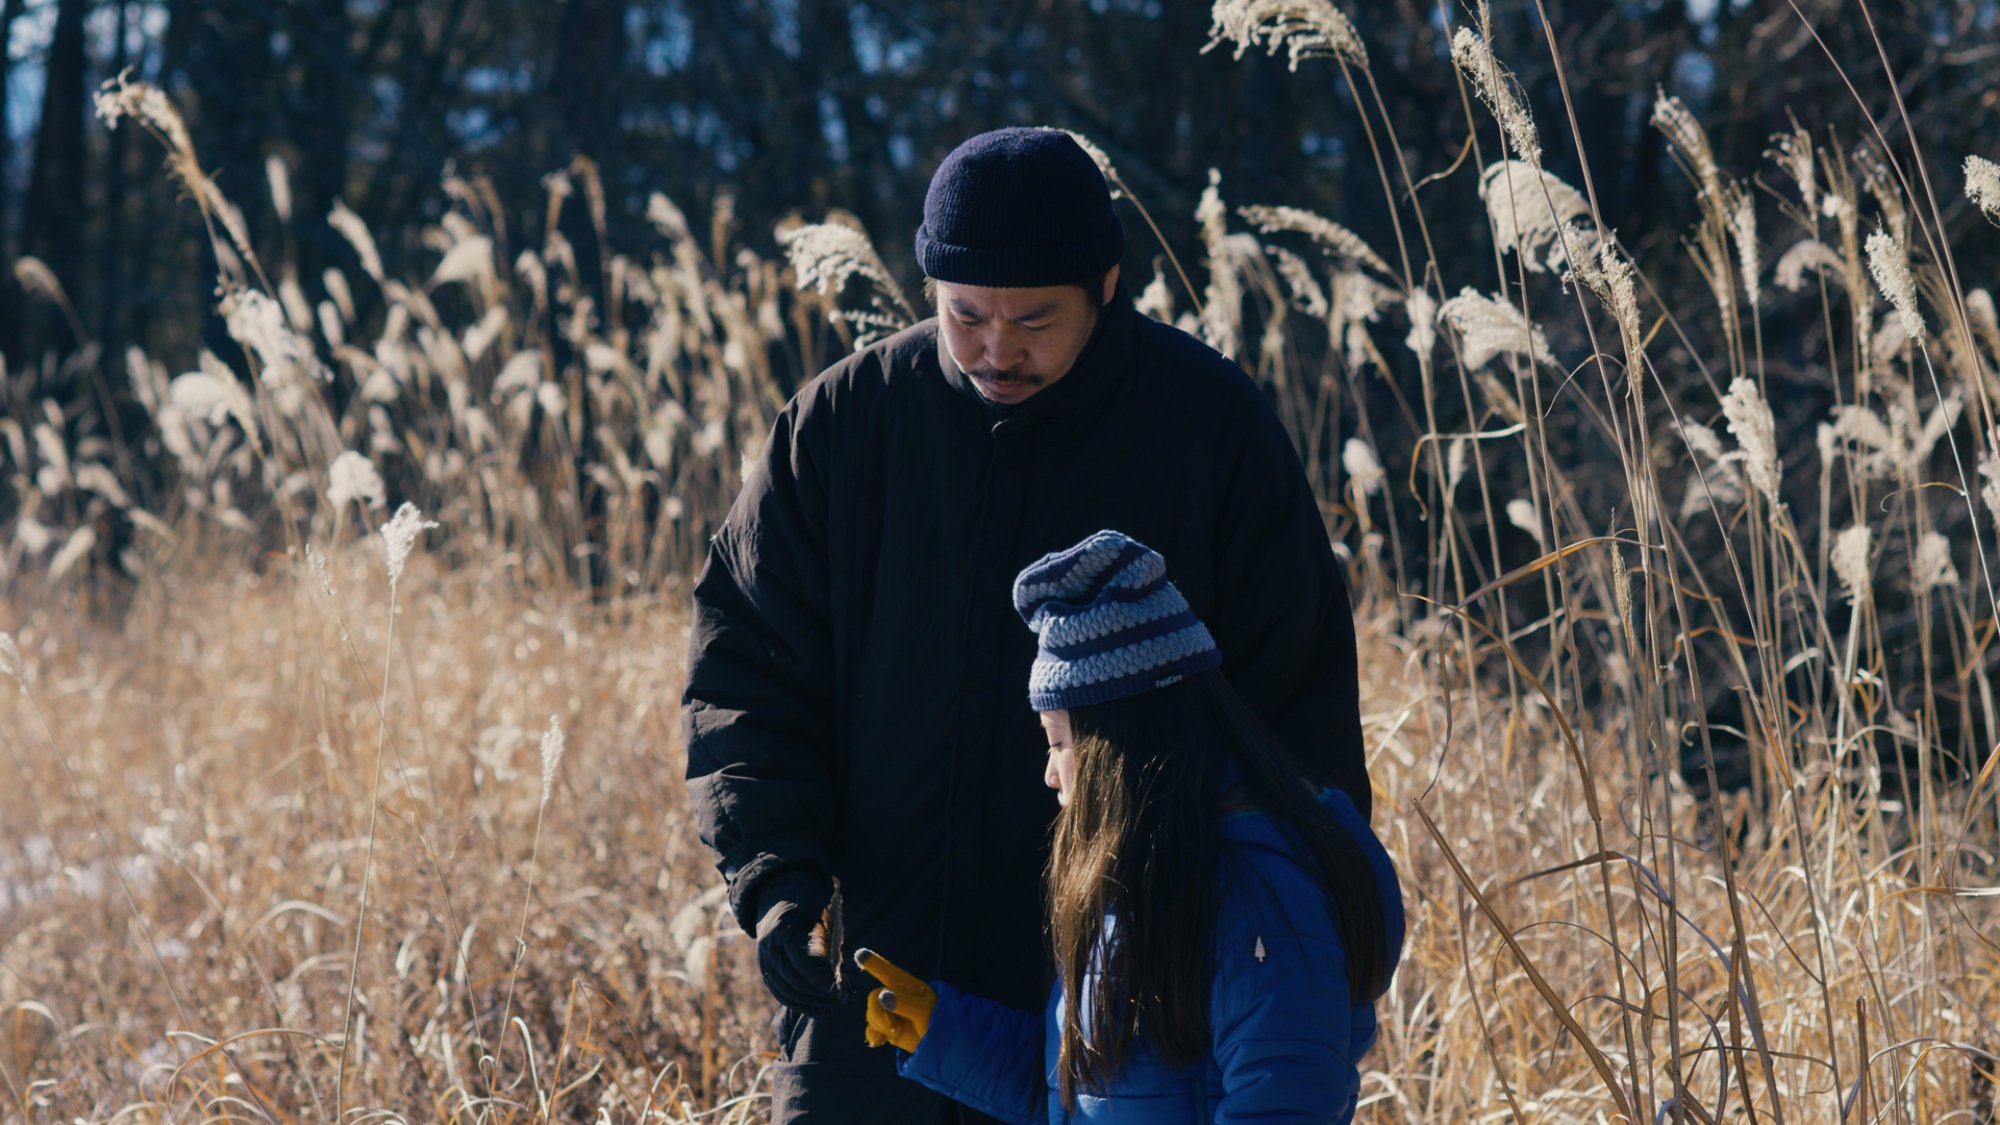 A man and a girl stand in a field in winter clothing, having a conversation.